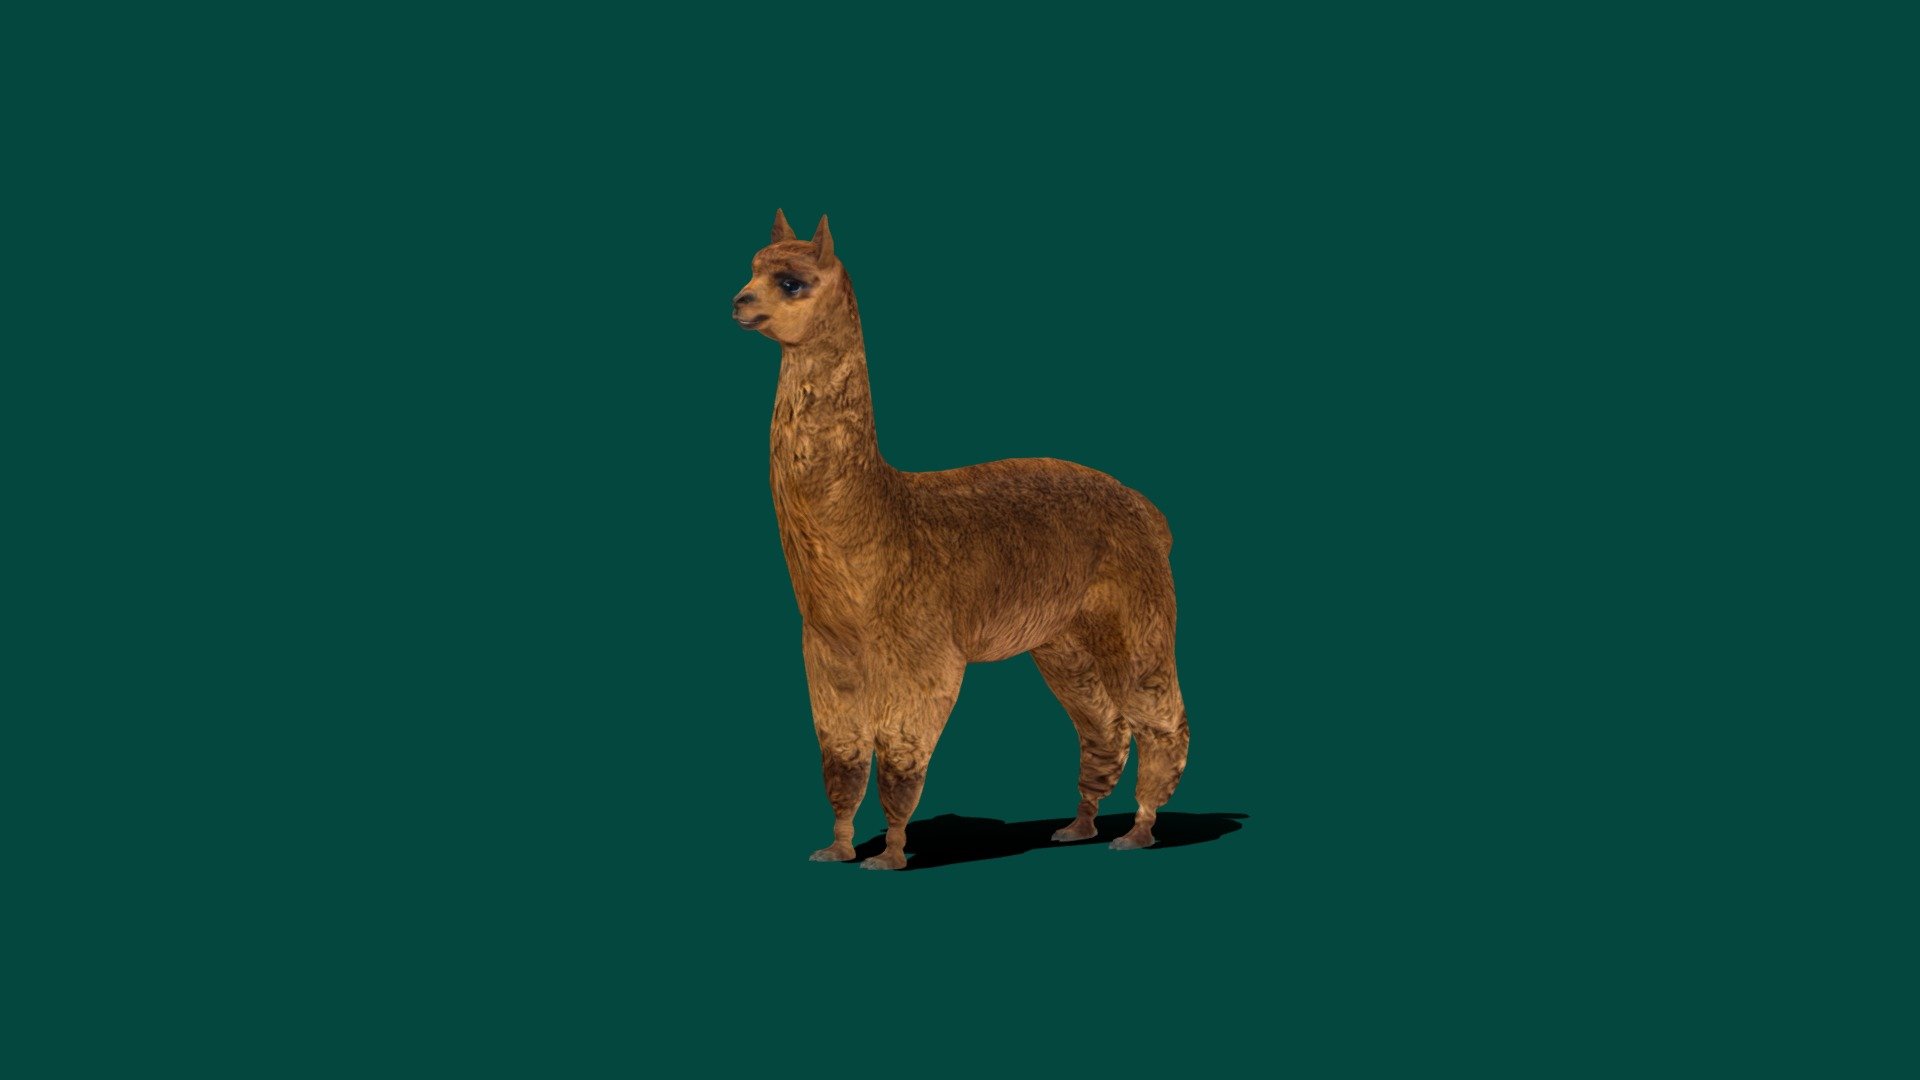 Alpaca Animal mammal (Vicugna_pacos)

4K PBR Textures Materials

13 Animations

Lowpoly

GameReady 

The alpaca is a species of South American camelid mammal. It is similar to, and often confused with, the llama. However, alpacas are often noticeably smaller than llamas. The two animals are closely related and can successfully crossbreed. Wikipedia
Breeds: Huacaya_alpaca
Gestation period: 11 – 12 months
Rank: Species
Mass: 48 – 84 kg (Adult)
Domain: Eukaryota
Family: Camelidae
Kingdom: Animalia
 - Alpaca (Lowpoly) - 3D model by Nyilonelycompany 3d model